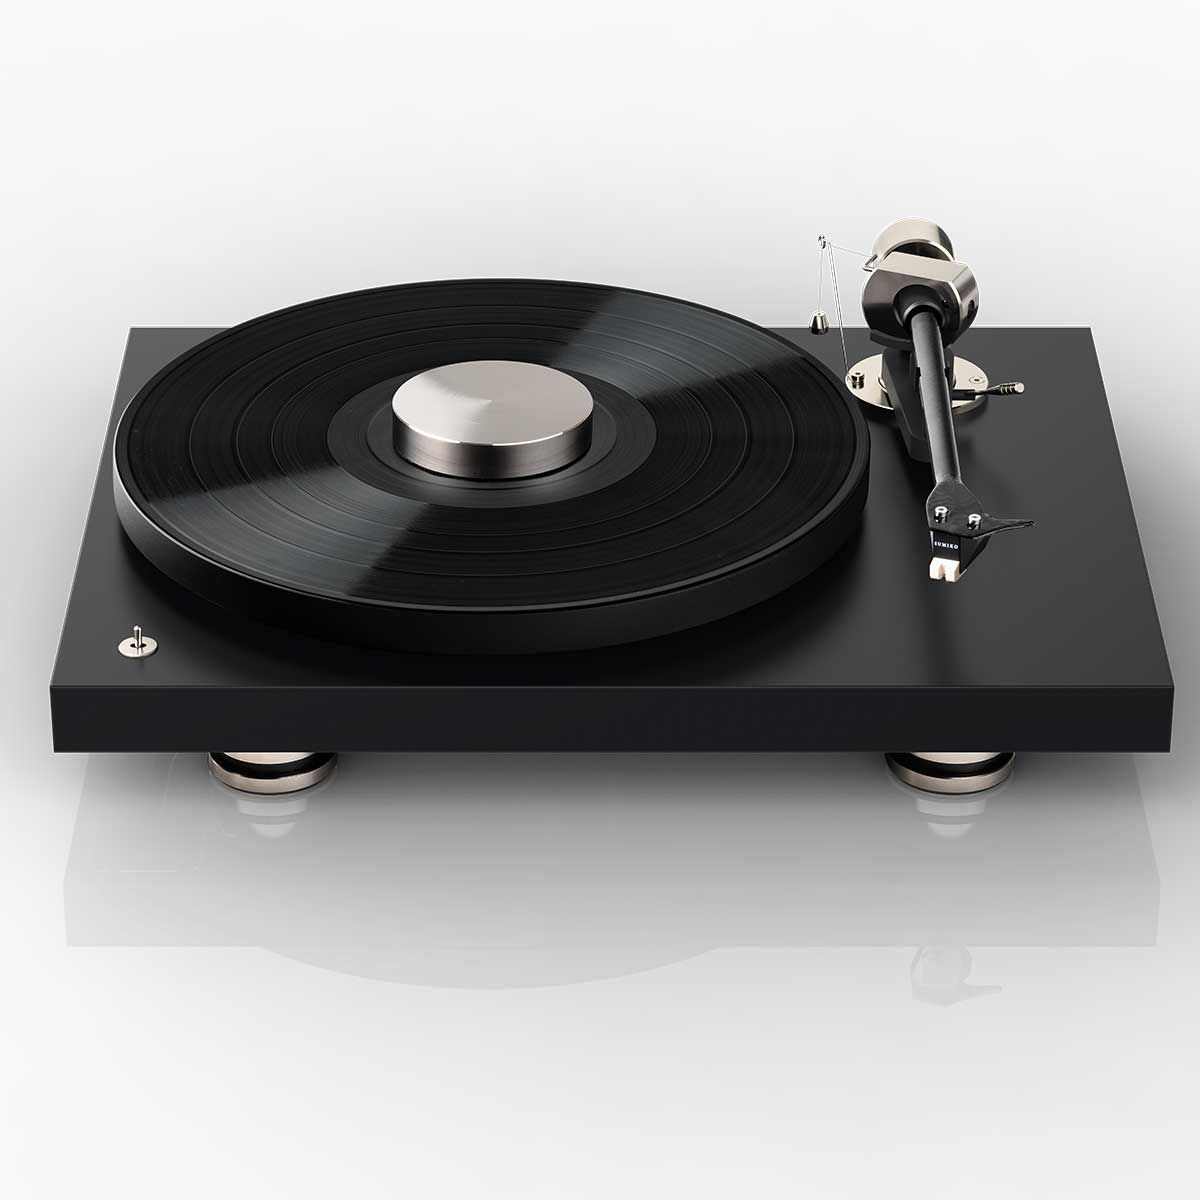 Pro-Ject Debut PRO Turntable, Satin Black, front top view with record and record puck